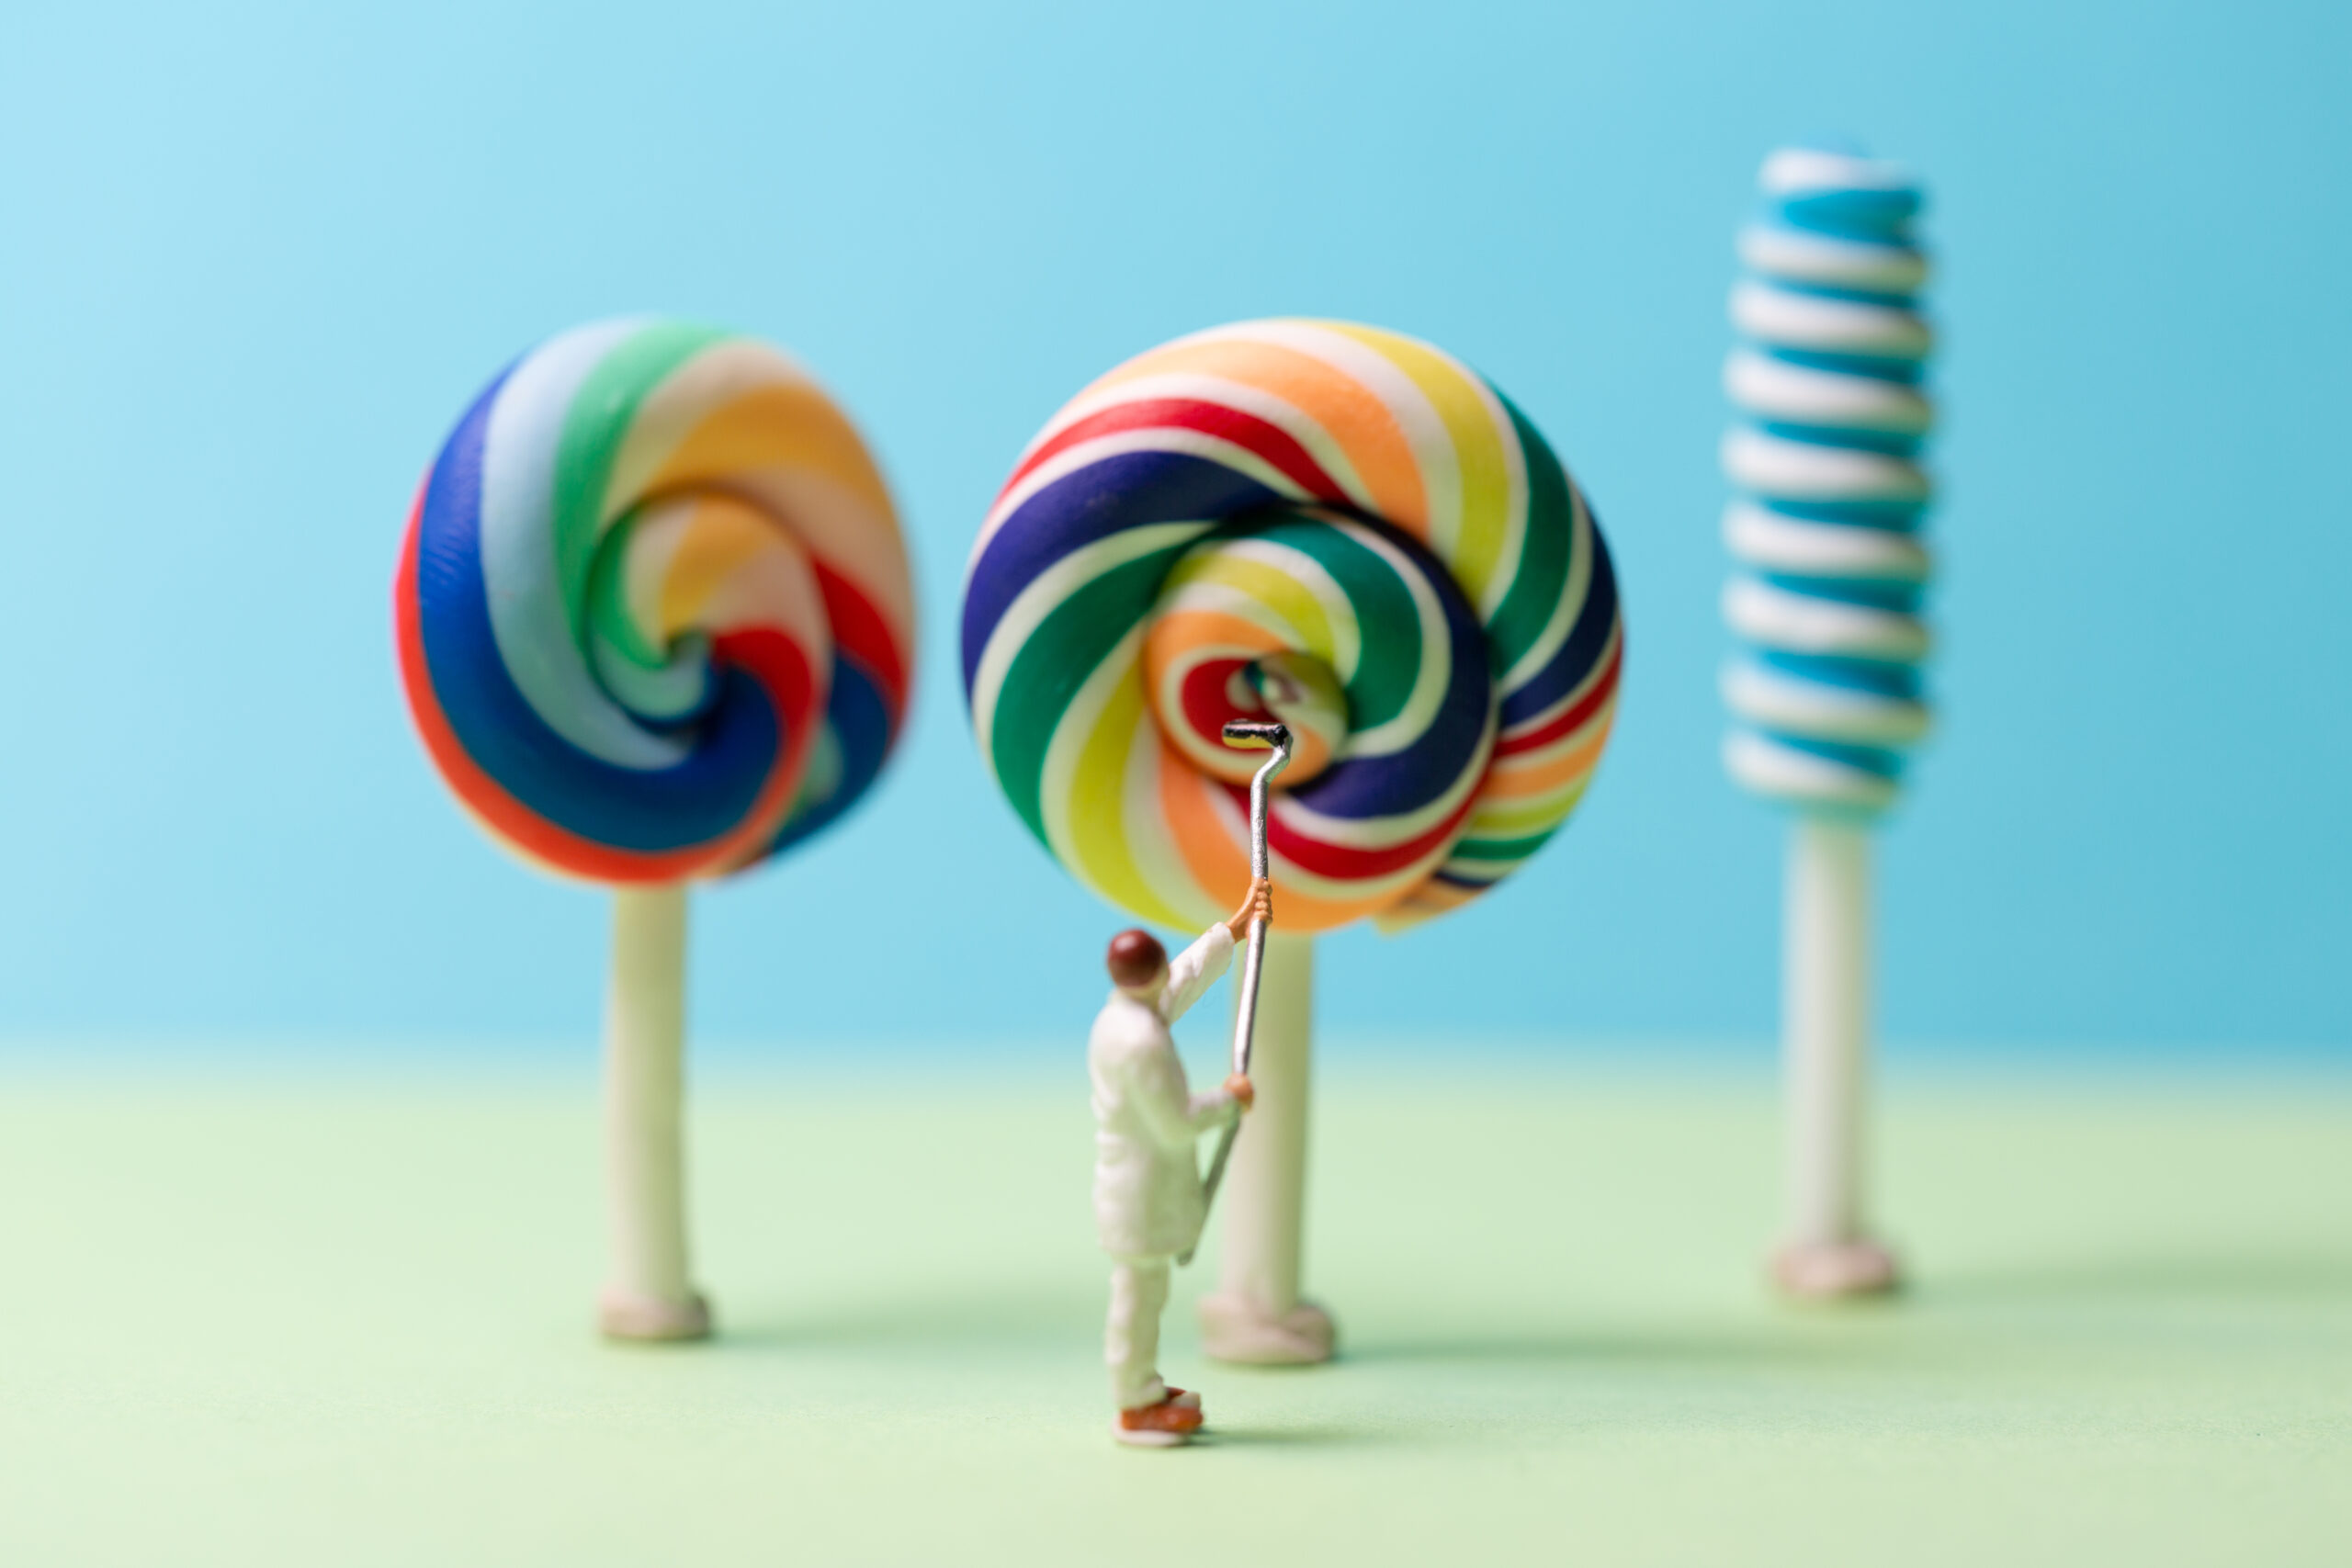 macrophotography of person cleaning a giant lolly